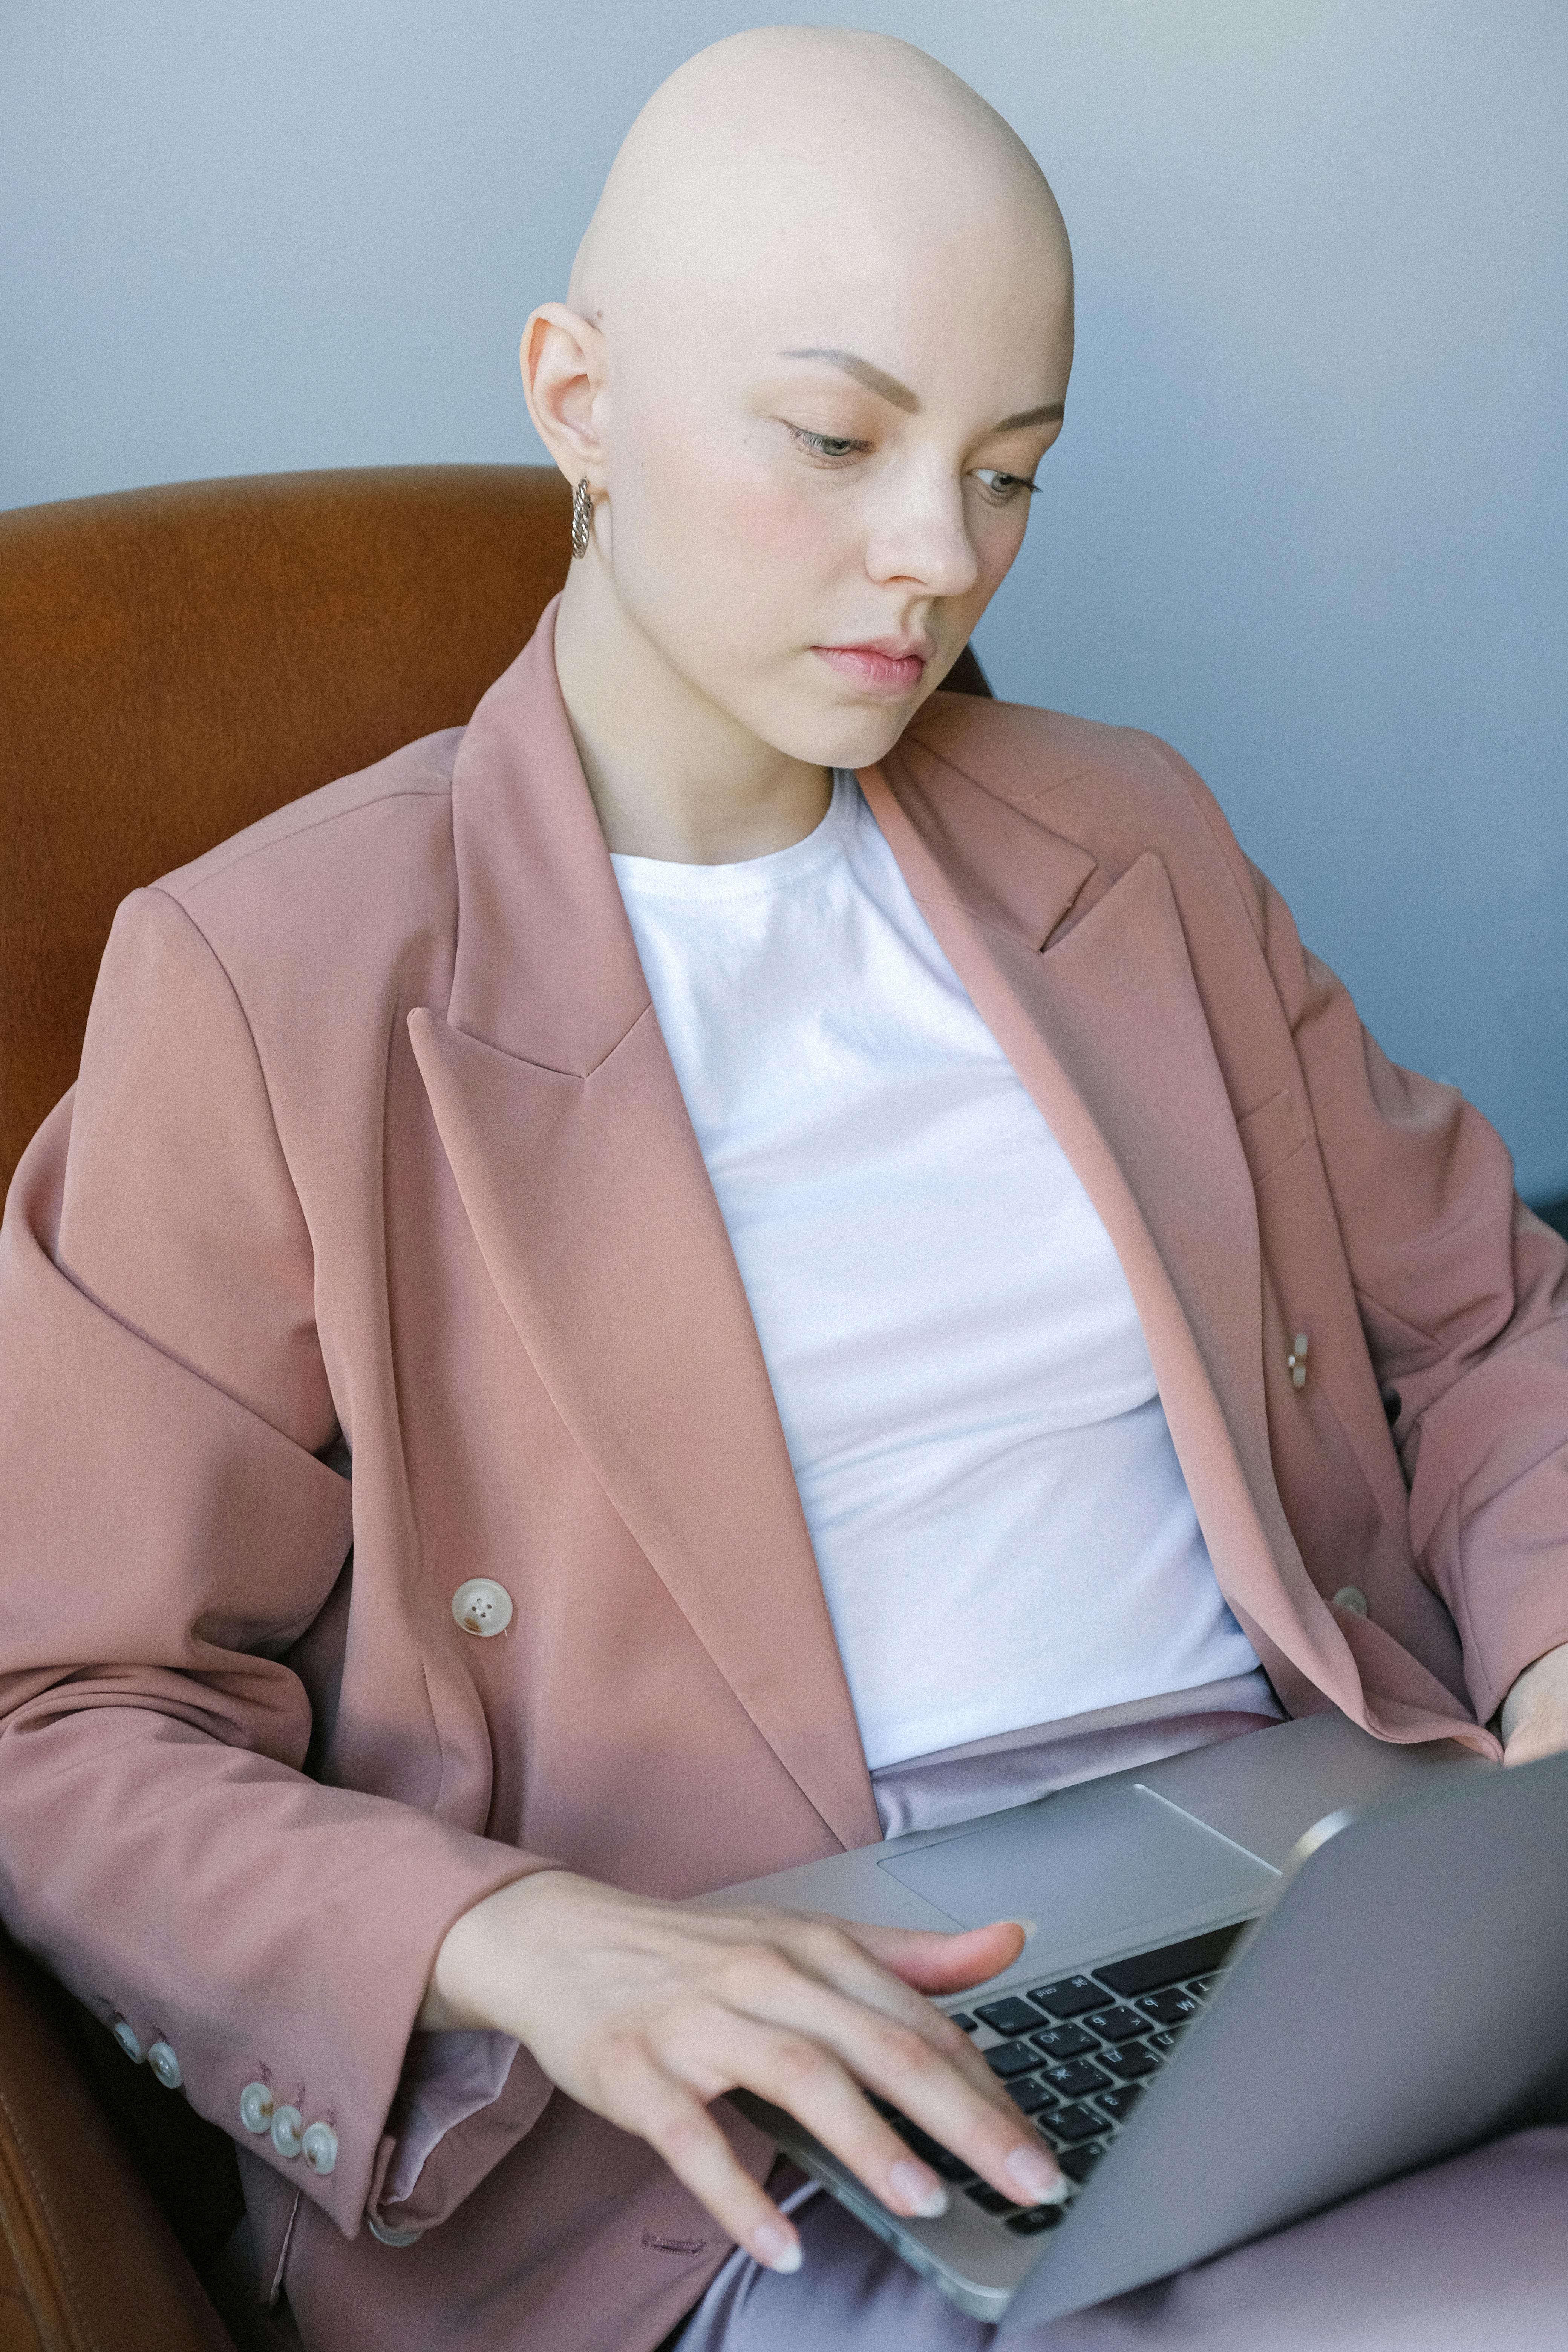 busy young businesswoman surfing laptop while working alone